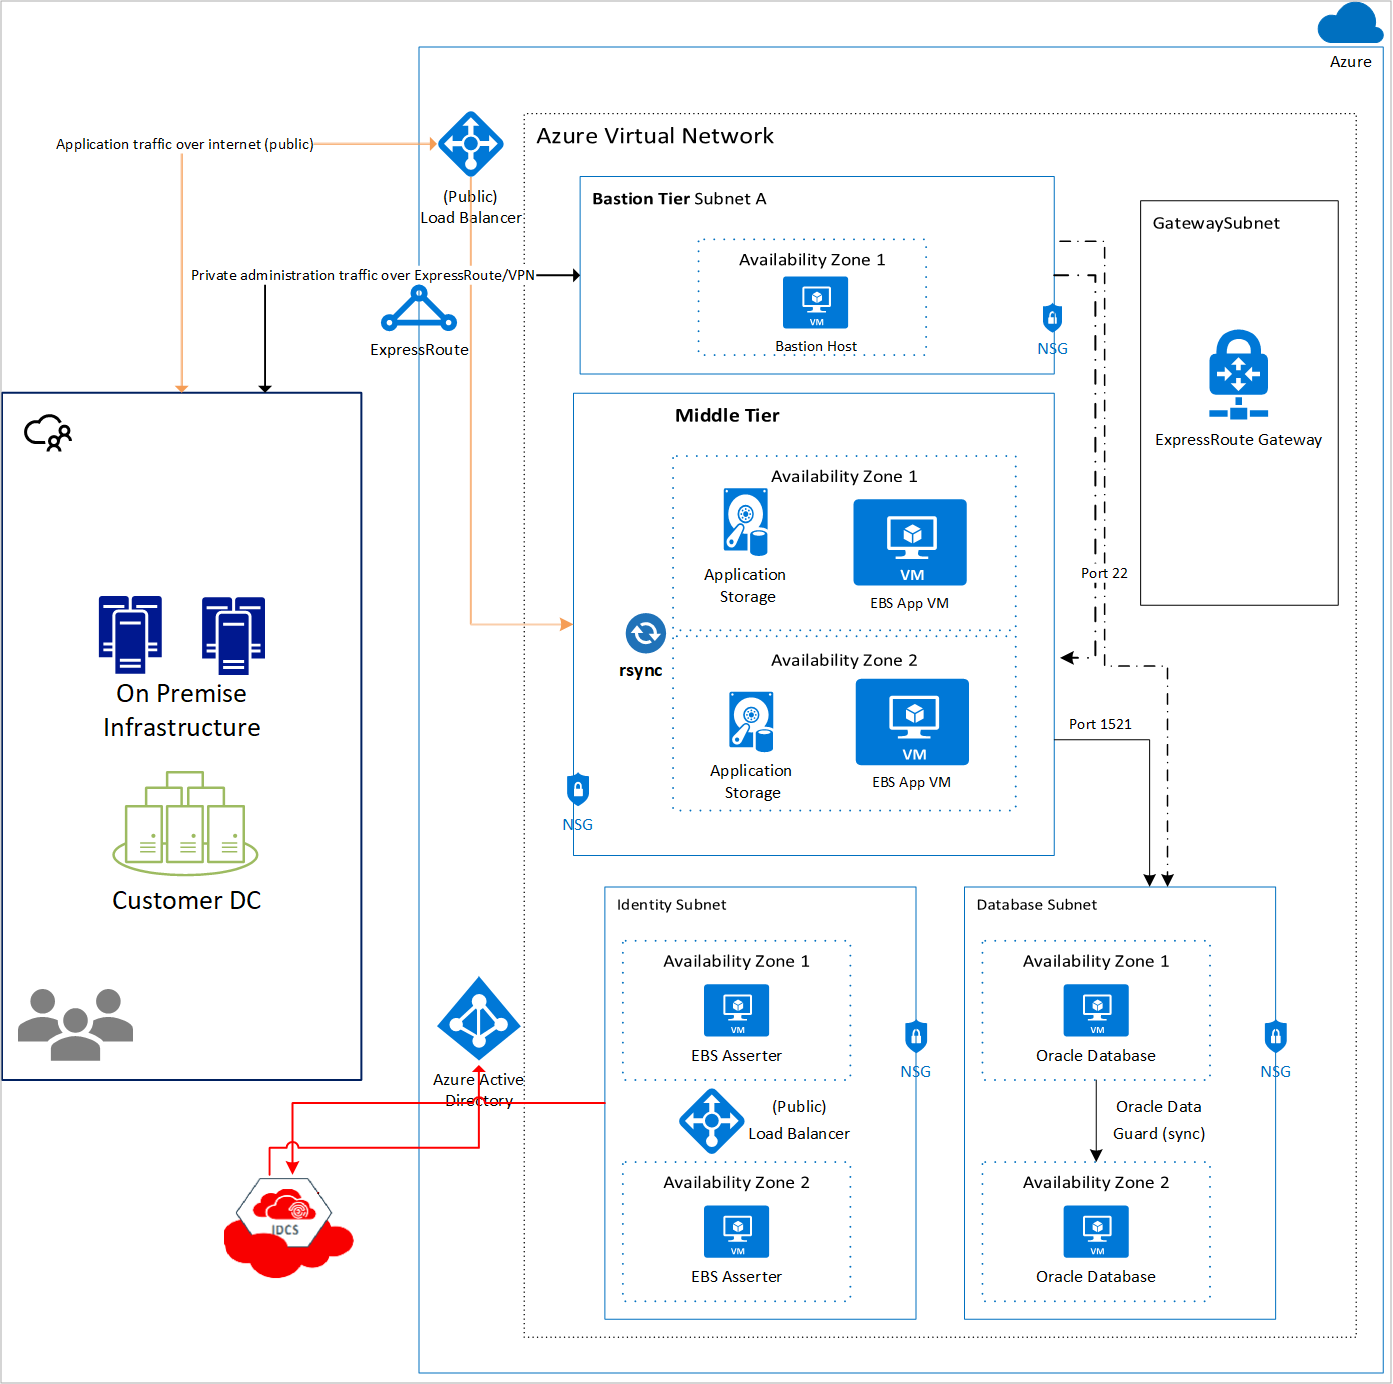 E-Business Suite Azure-only architecture